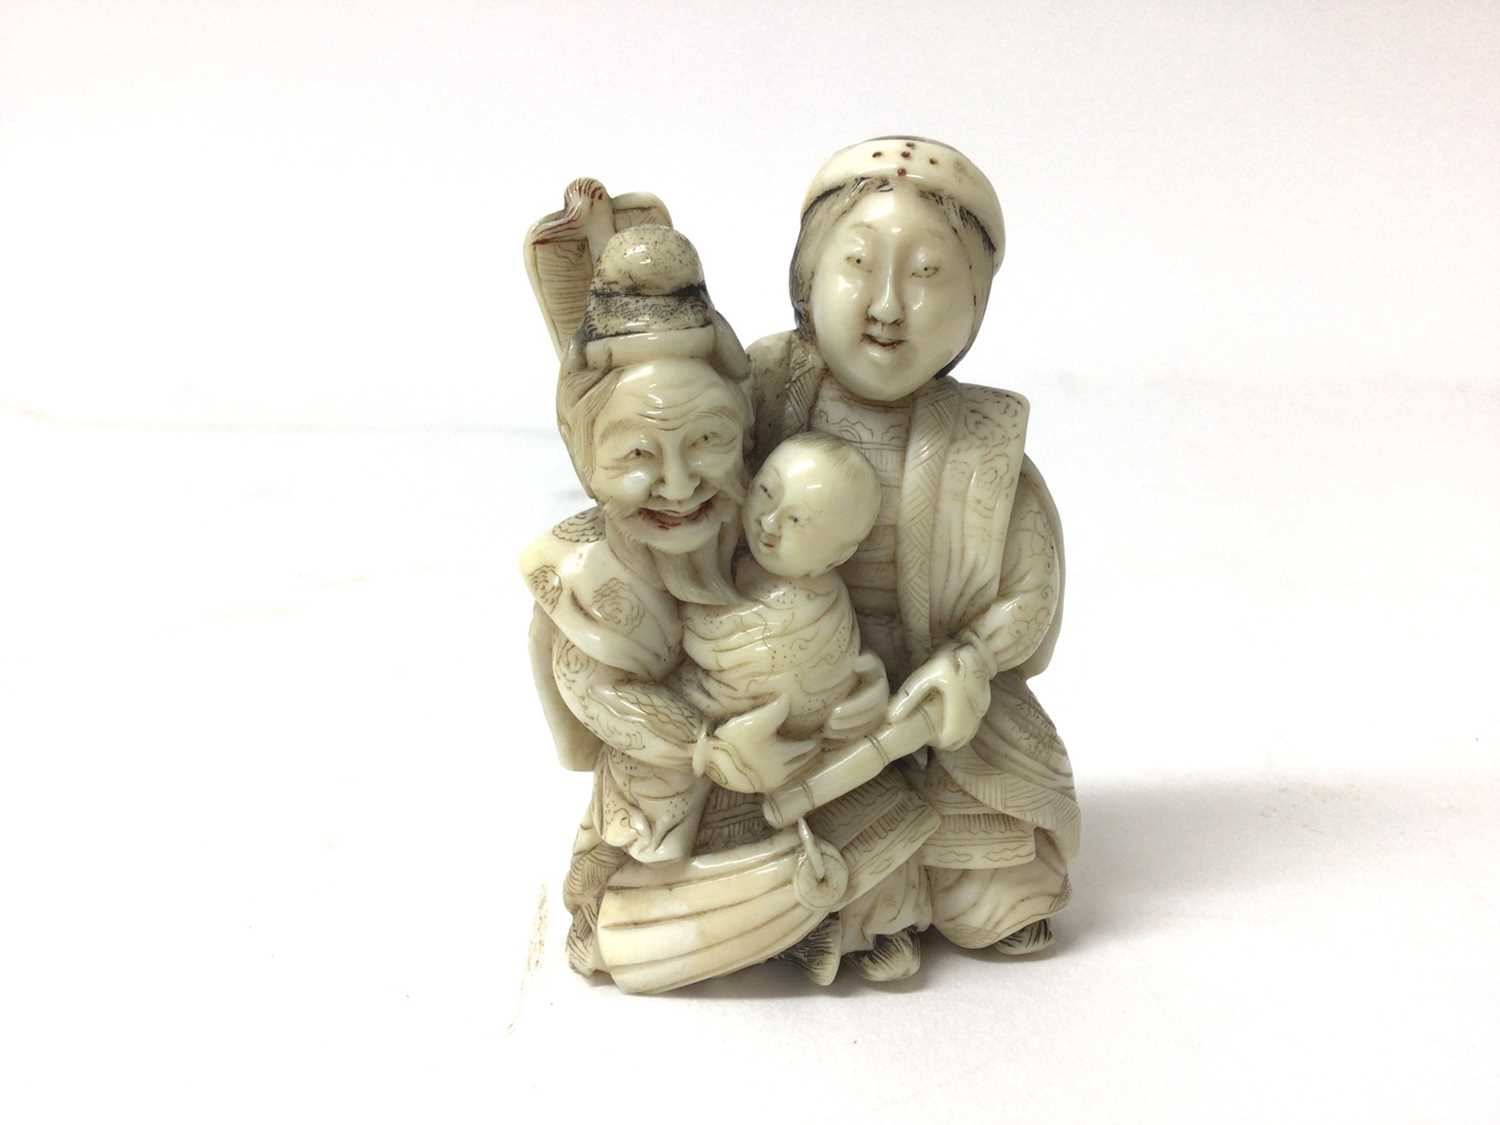 Lot 36 - 19th century Japanese ivory figure group of a samurai, wife and child, 6.5cm high